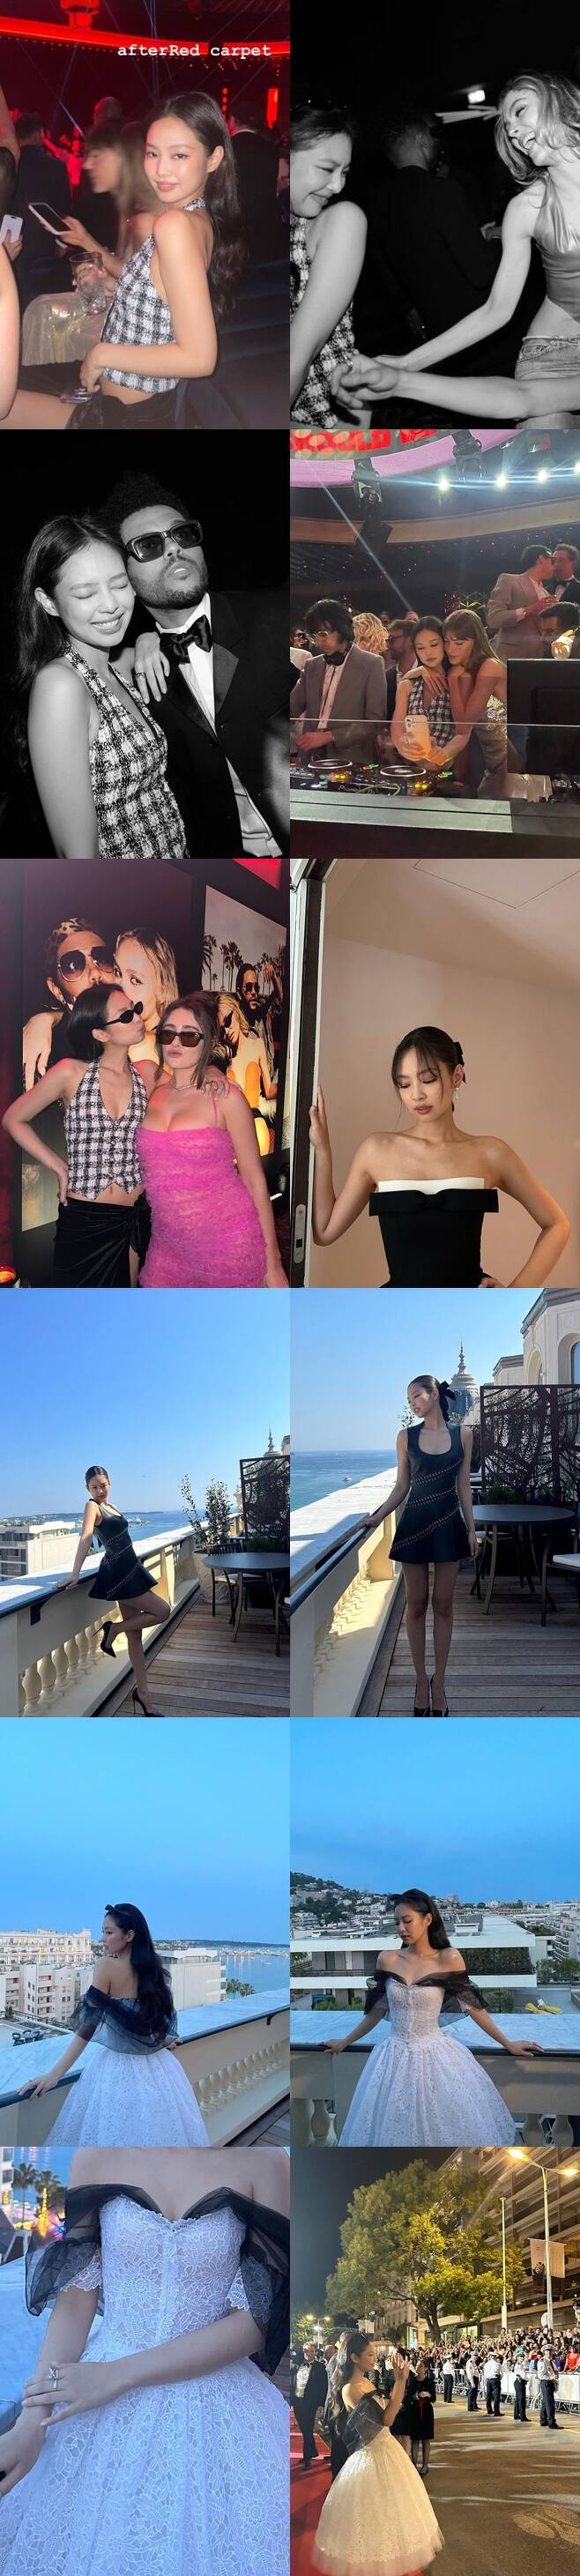 Group Black Pink member Jennie Kim unveiled the Khan Film Festival.Jennie Kim posted several photos on her official SNS on May 24 (local time), along with The Idol Premiere at the Cannes Film Festival (Cannes Film Festival Premiere) and Feelings like a Princess (Feelingss as Princess).In the photo, Jennie Kim was wearing a red carpet costume at the Cannes Film Festival in various designs.Jennie Kim showed a variety of charms, ranging from colorful long dresses reminiscent of Disney princesses to chic sleeveless mini dresses and off-shoulder dresses with beautiful shoulder lines.He also released a photo of the Cannes Film Festival Afterparty.In the photo, Jennie Kim enjoyed a party with singer and actor The Weeknd and actor Lily Rose Depp in a bold outfit with solid abs and slender limbs.Jennie Kim, who enjoys world popularity as a member of Black Pink, entered the Cannes Film Festival for the first time as an actor and collected topics every day.Jennie Kim Actors debut American HBO drama series The Idol (The Idol) was invited to the Cannes International Film Festival non-competition.This is a drama about all the relationships surrounding the emerging pop idol and the story of the music industry world. Jennie Kim and other top global artists such as The Weeknd, Lily Rose Depp and Troy Sivan appear.Last year, Jennie Kim made her appearance official through her agency YG Entertainment and said, As soon as I read the scenario, I felt so attractive that I really wanted to be with her. Im very excited.Unveiled, The Idol was met with harsh criticism.At the premiere of the Cannes Film Festival, two of the five episodes were released, and Rotten Tomatoes, a rating site, received an unprecedented score of 9% freshness and a rotten tomato mark.This is a result of the narrative being based on a crooked masculine perspective; the foreign Rolling Stone reviewer called it terrible, brutal and far worse than expected, while the Hollywood Reporter reviewer called it a lewd male fantasy.There was also a reaction that it was like torture porn because it glorified rape.The Idol will premiere on HBO on June 4.